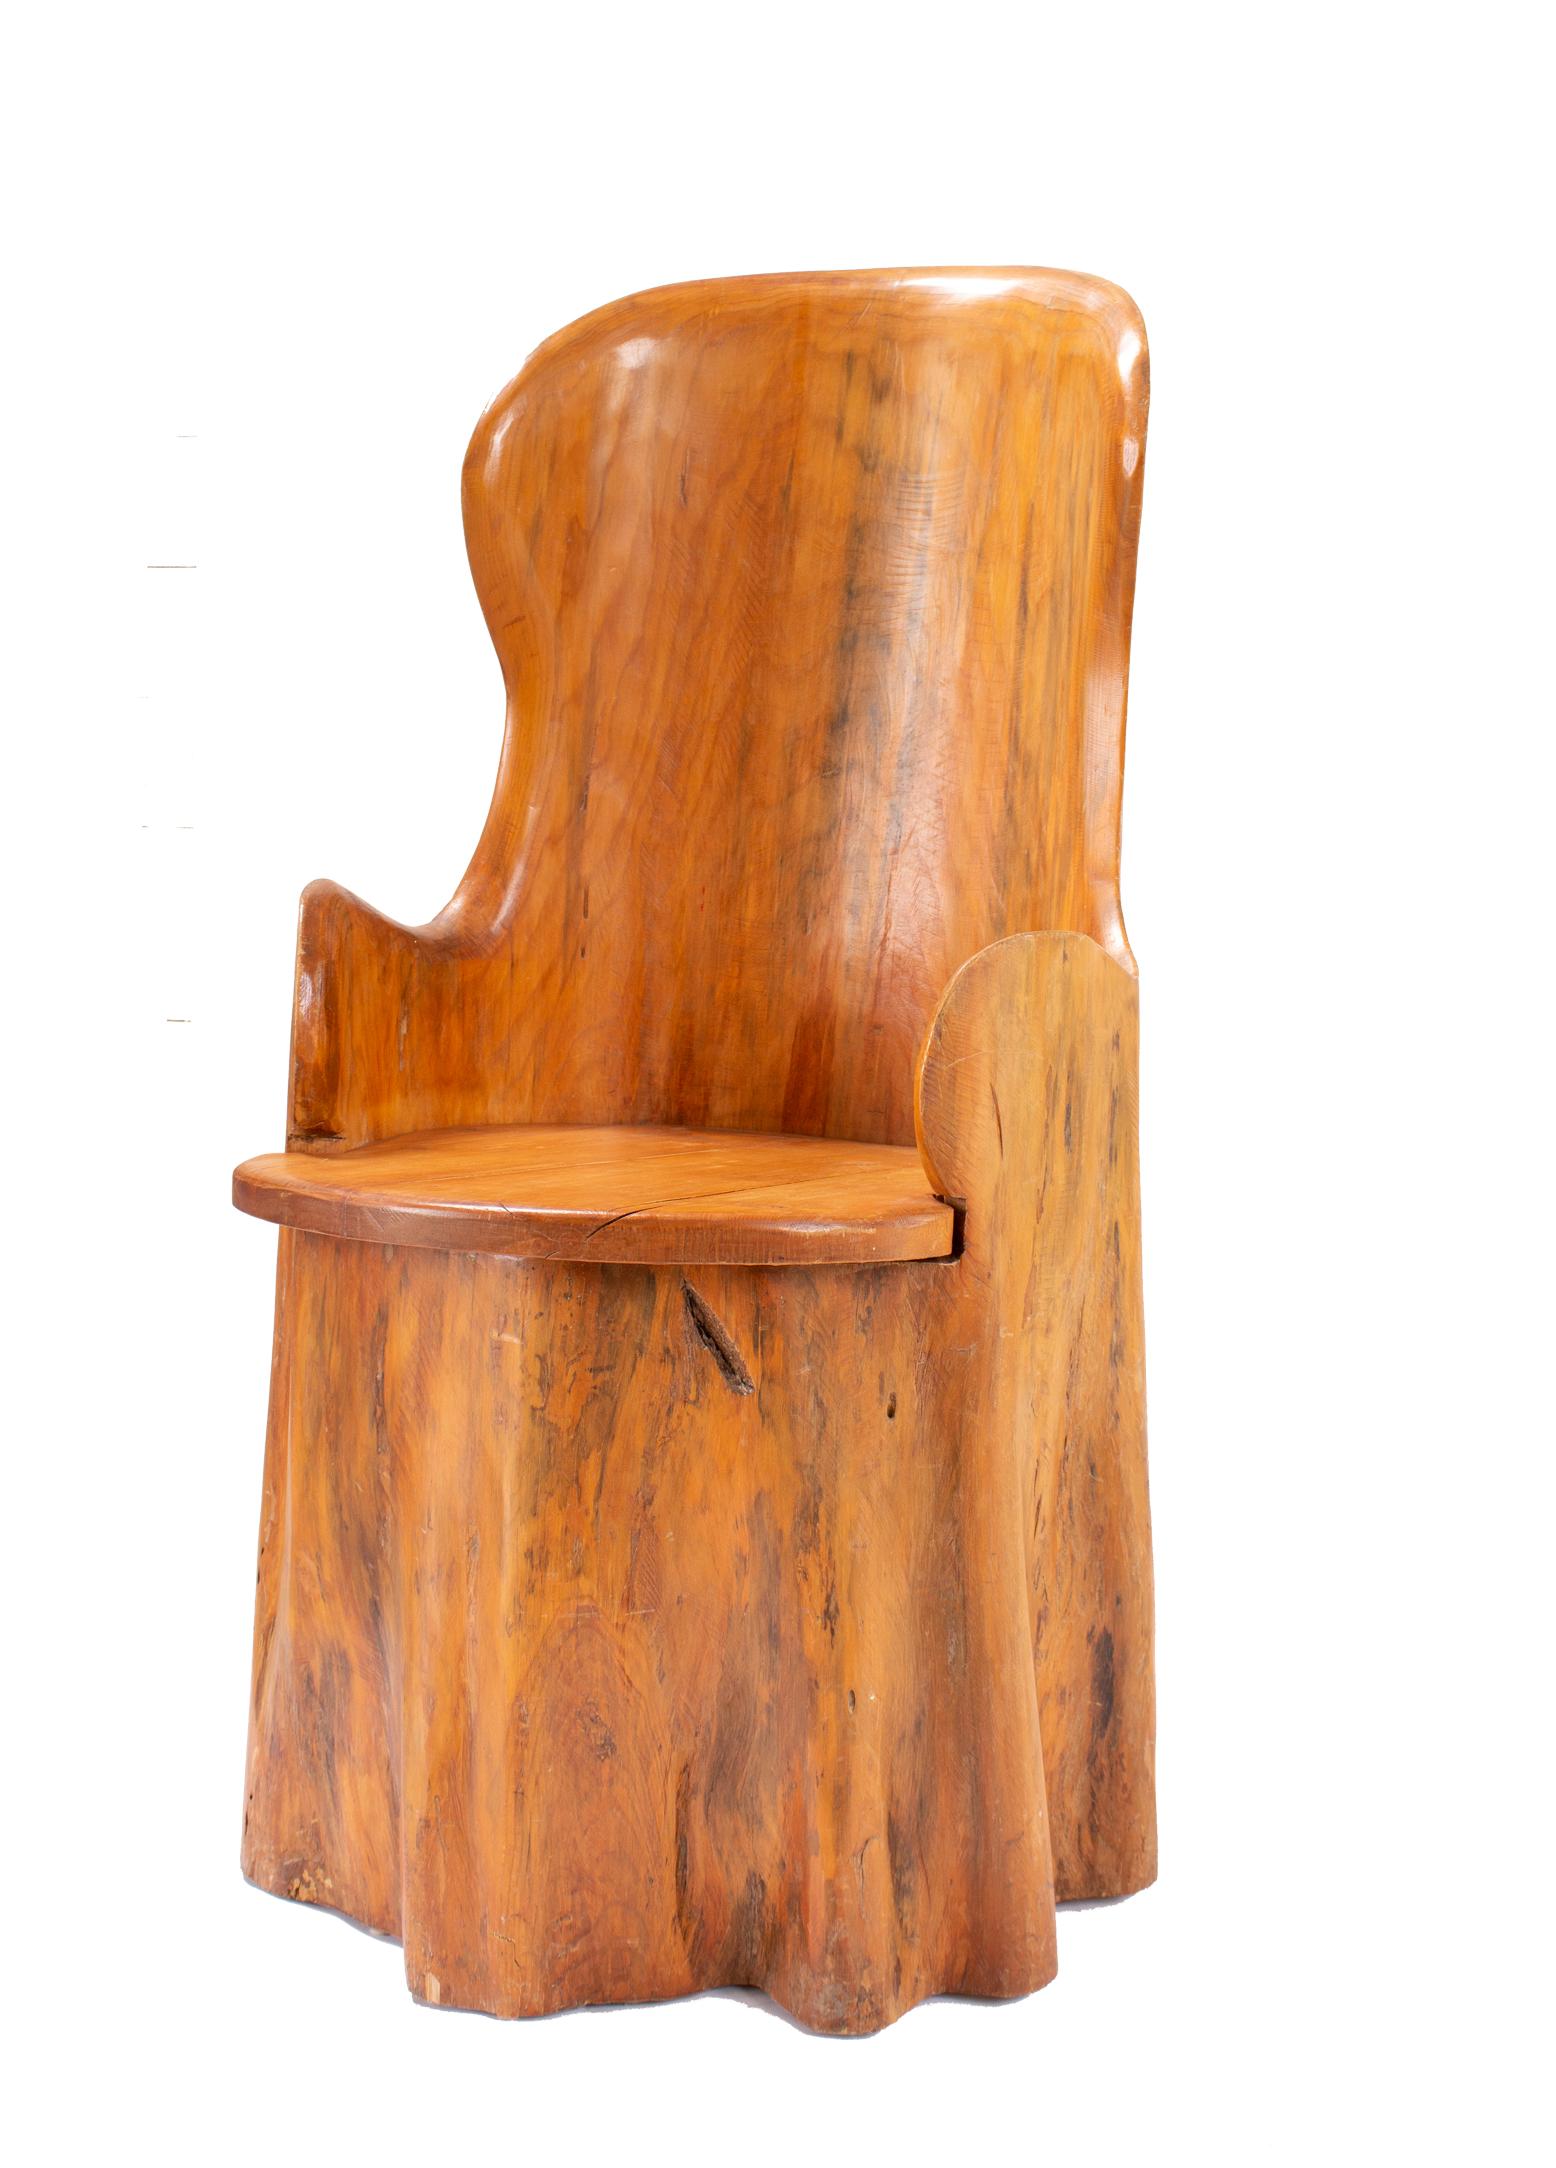 Scandinavian wooden barrel chair made in the 19th century. A circular, beautifully wooden chair with patina and soft edges hollowed out from a naturally formed tree trunk. It has an organic, natural shape almost like a draped cloth. The appearance